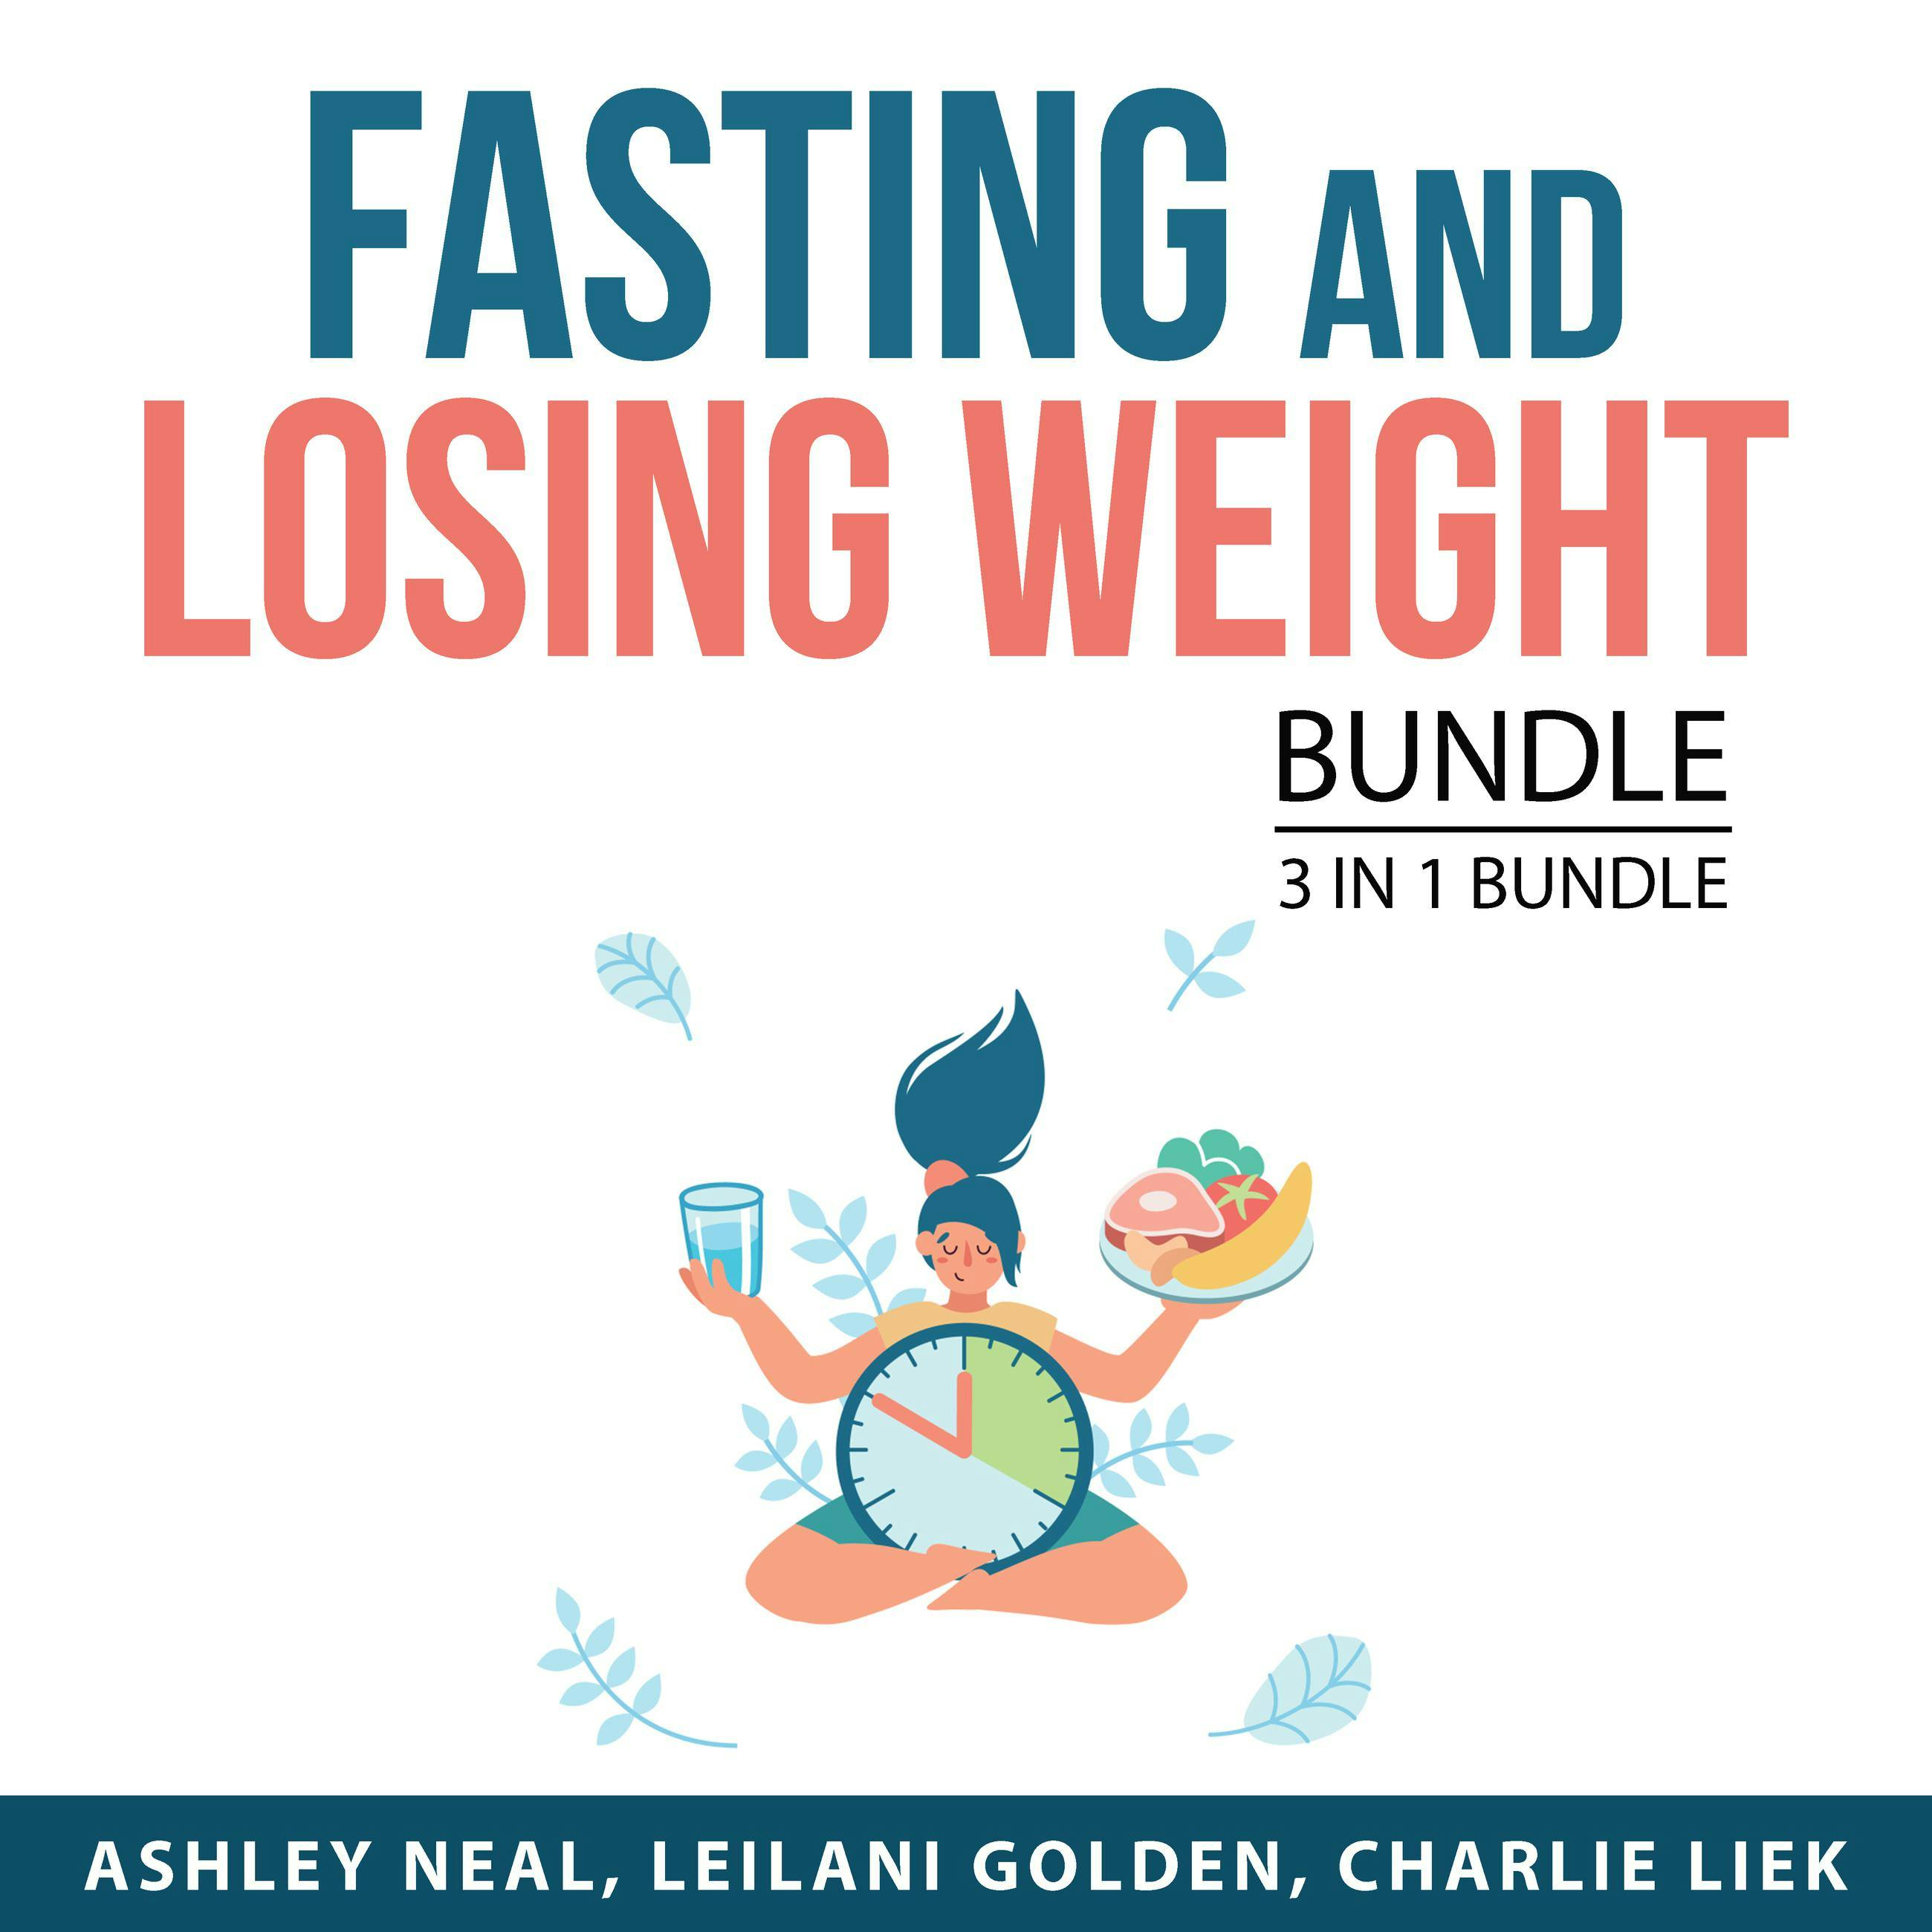 Fasting and Losing Weight Bundle, 3 in 1 Bundle: Everything About Intermittent Fasting, Fasting Diet For Weight Loss, Lose the Pounds - Charlie Liek, Ashley Neal, Leilani Golden